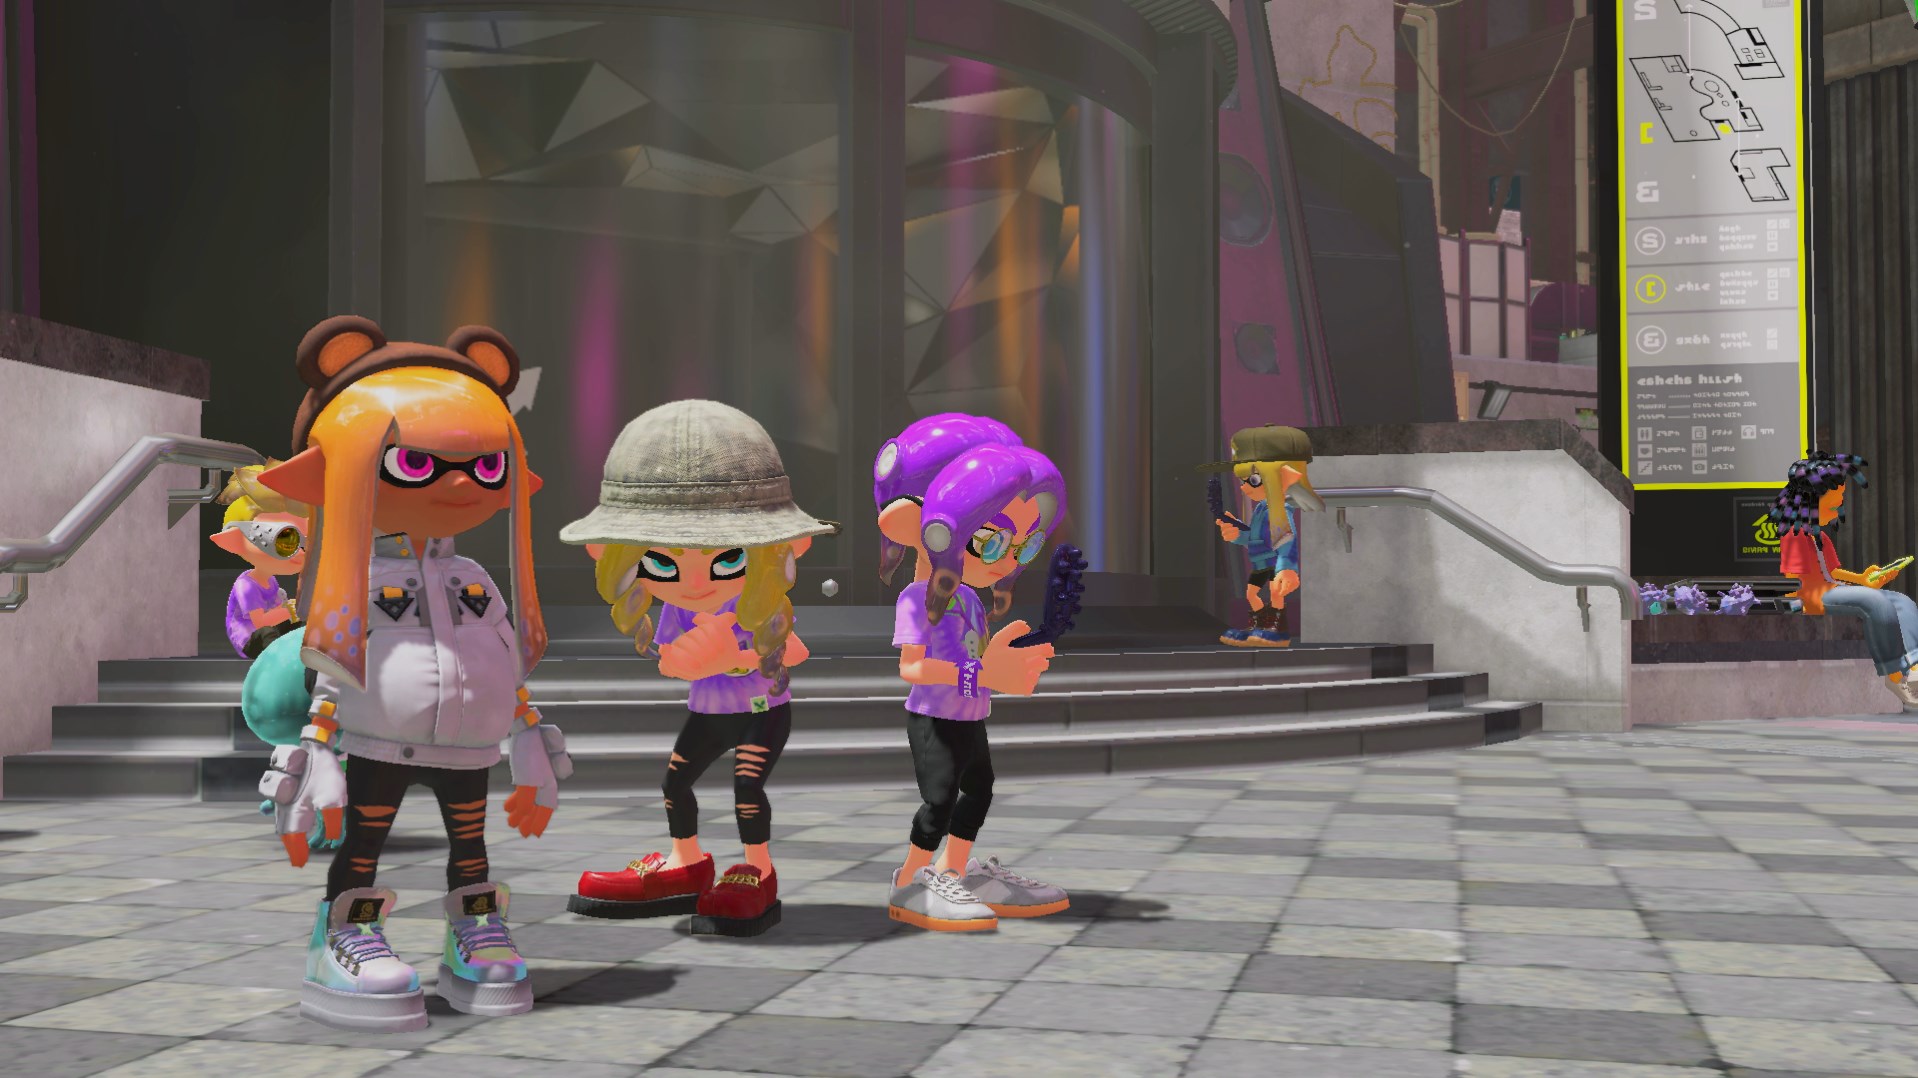 One inkling and two octolings stand in front of a lobby. The two octolings are in Splatfest Tees while the inkling is wearing bear ears and a white puffer jacket